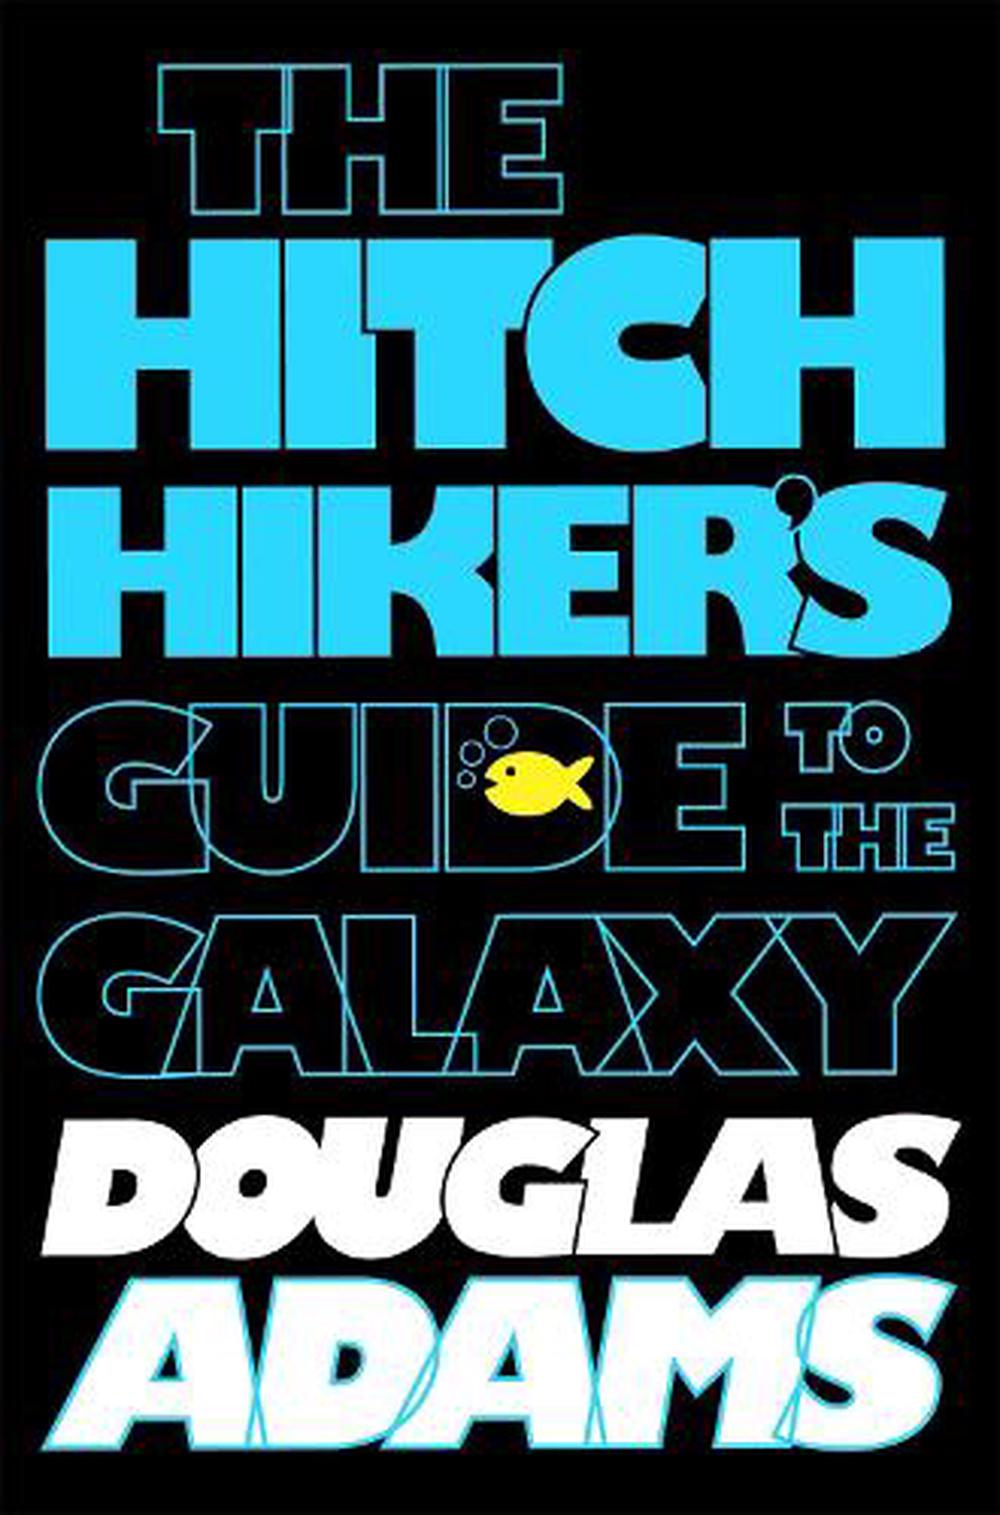 hitchhiker's guide book review